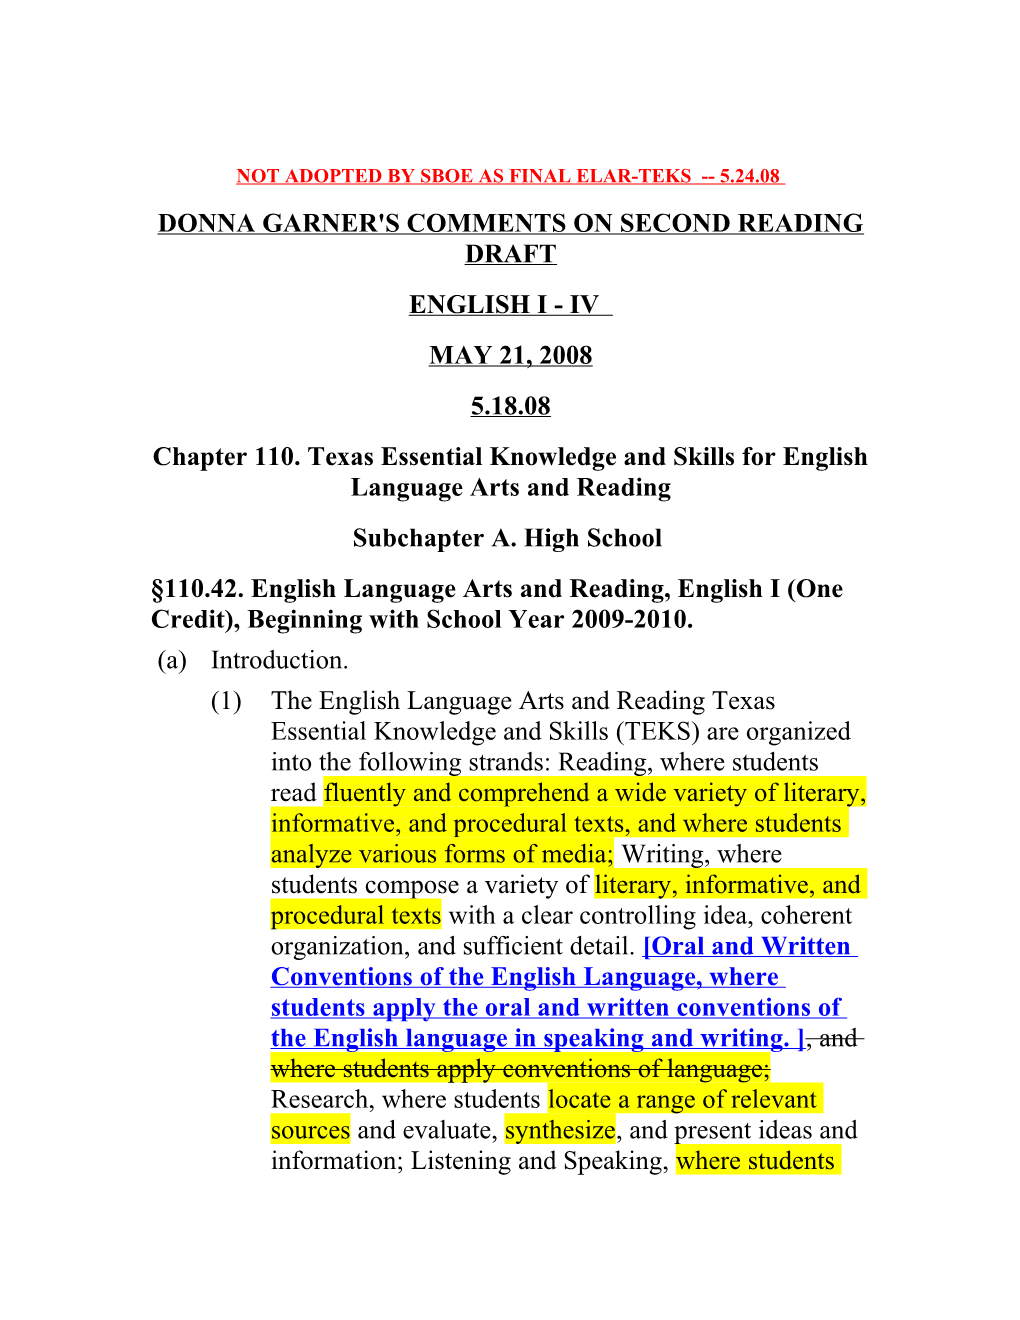 Final Draft Document - Second Reading May 21, 2008